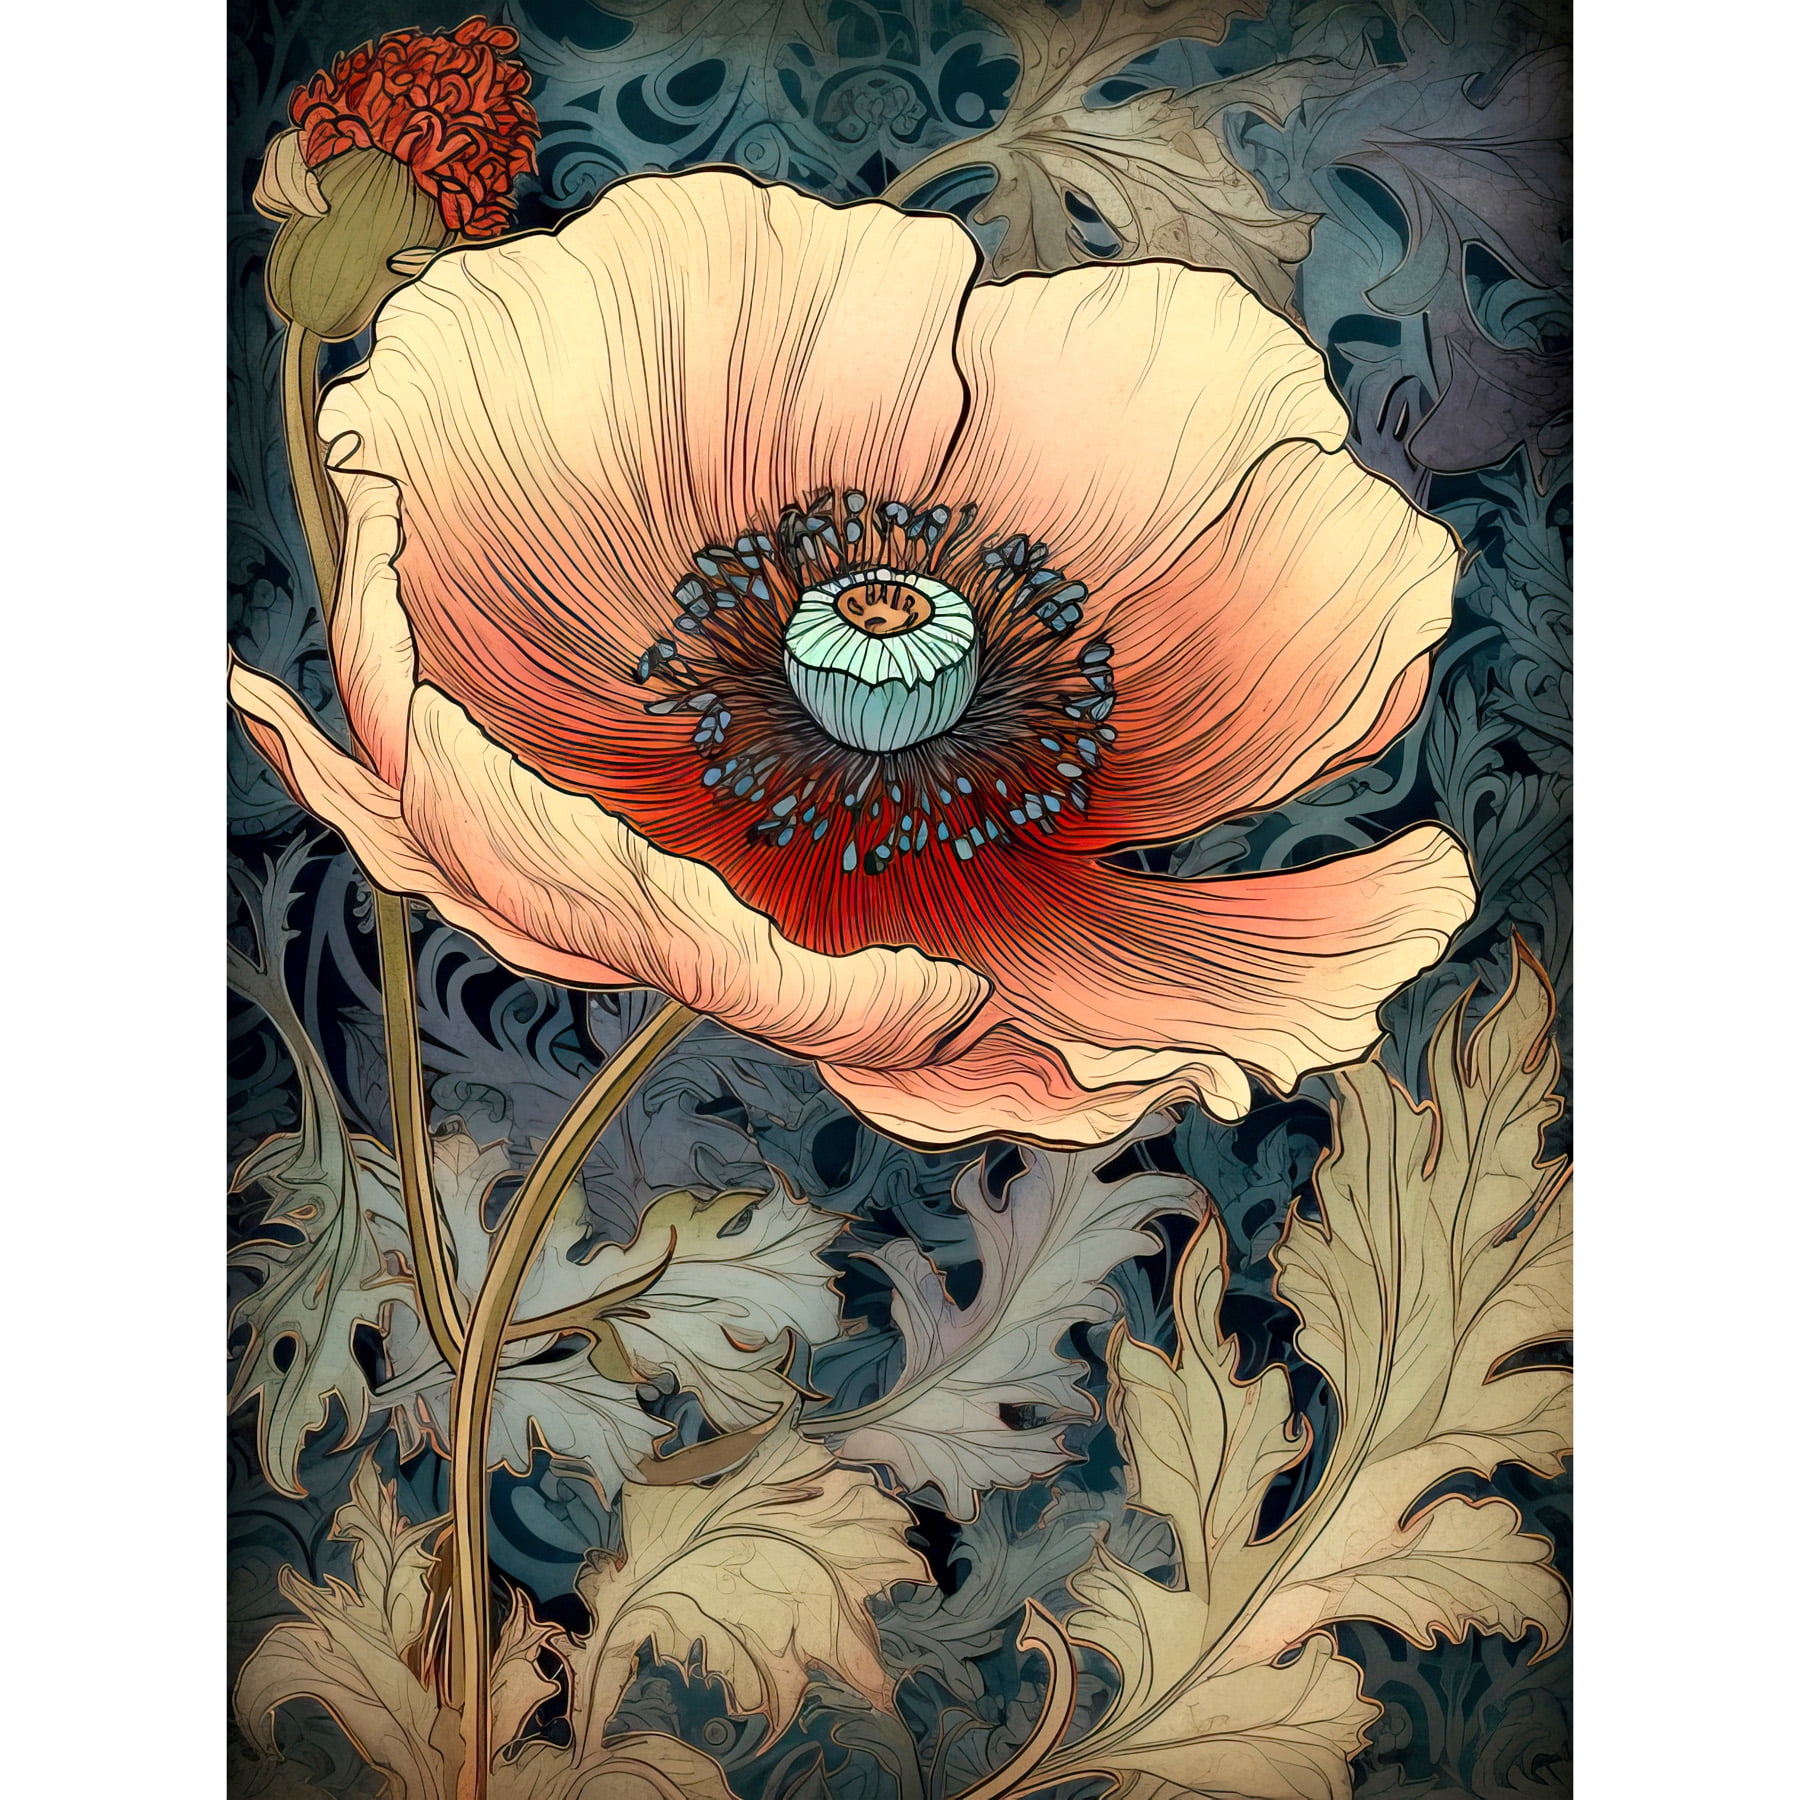 Paper William Poster 18X24 Morris Bloom Style Large Inch Flower Art Anemone Wall Thick Print Peach